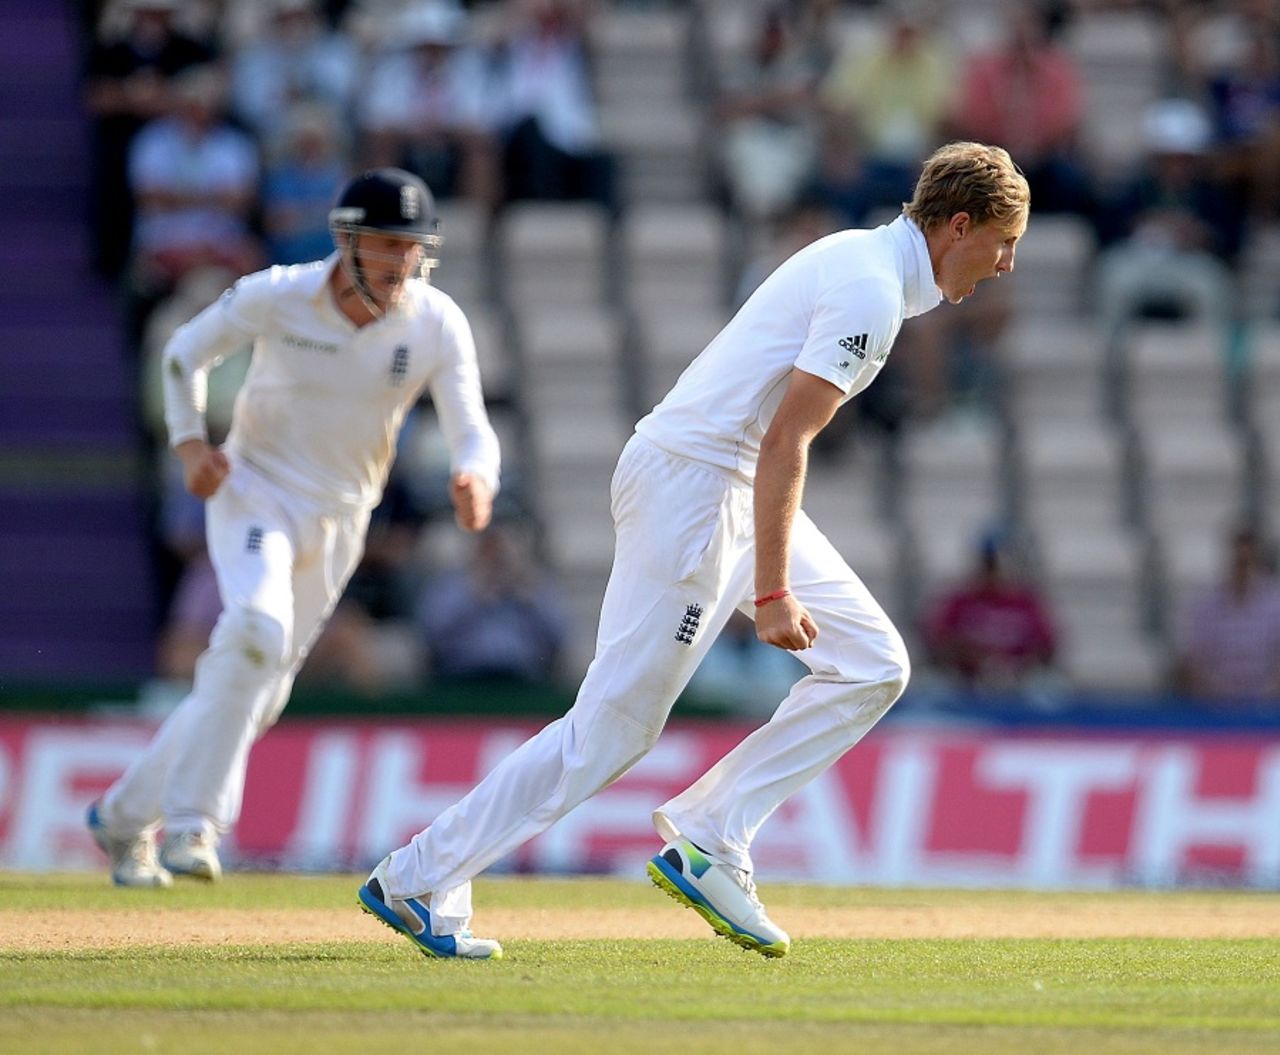 Joe Root sets off on a celebratory run after dismissing Shikhar Dhawan, England v India, 3rd Investec Test, Ageas Bowl, 4th day, July 30, 2014